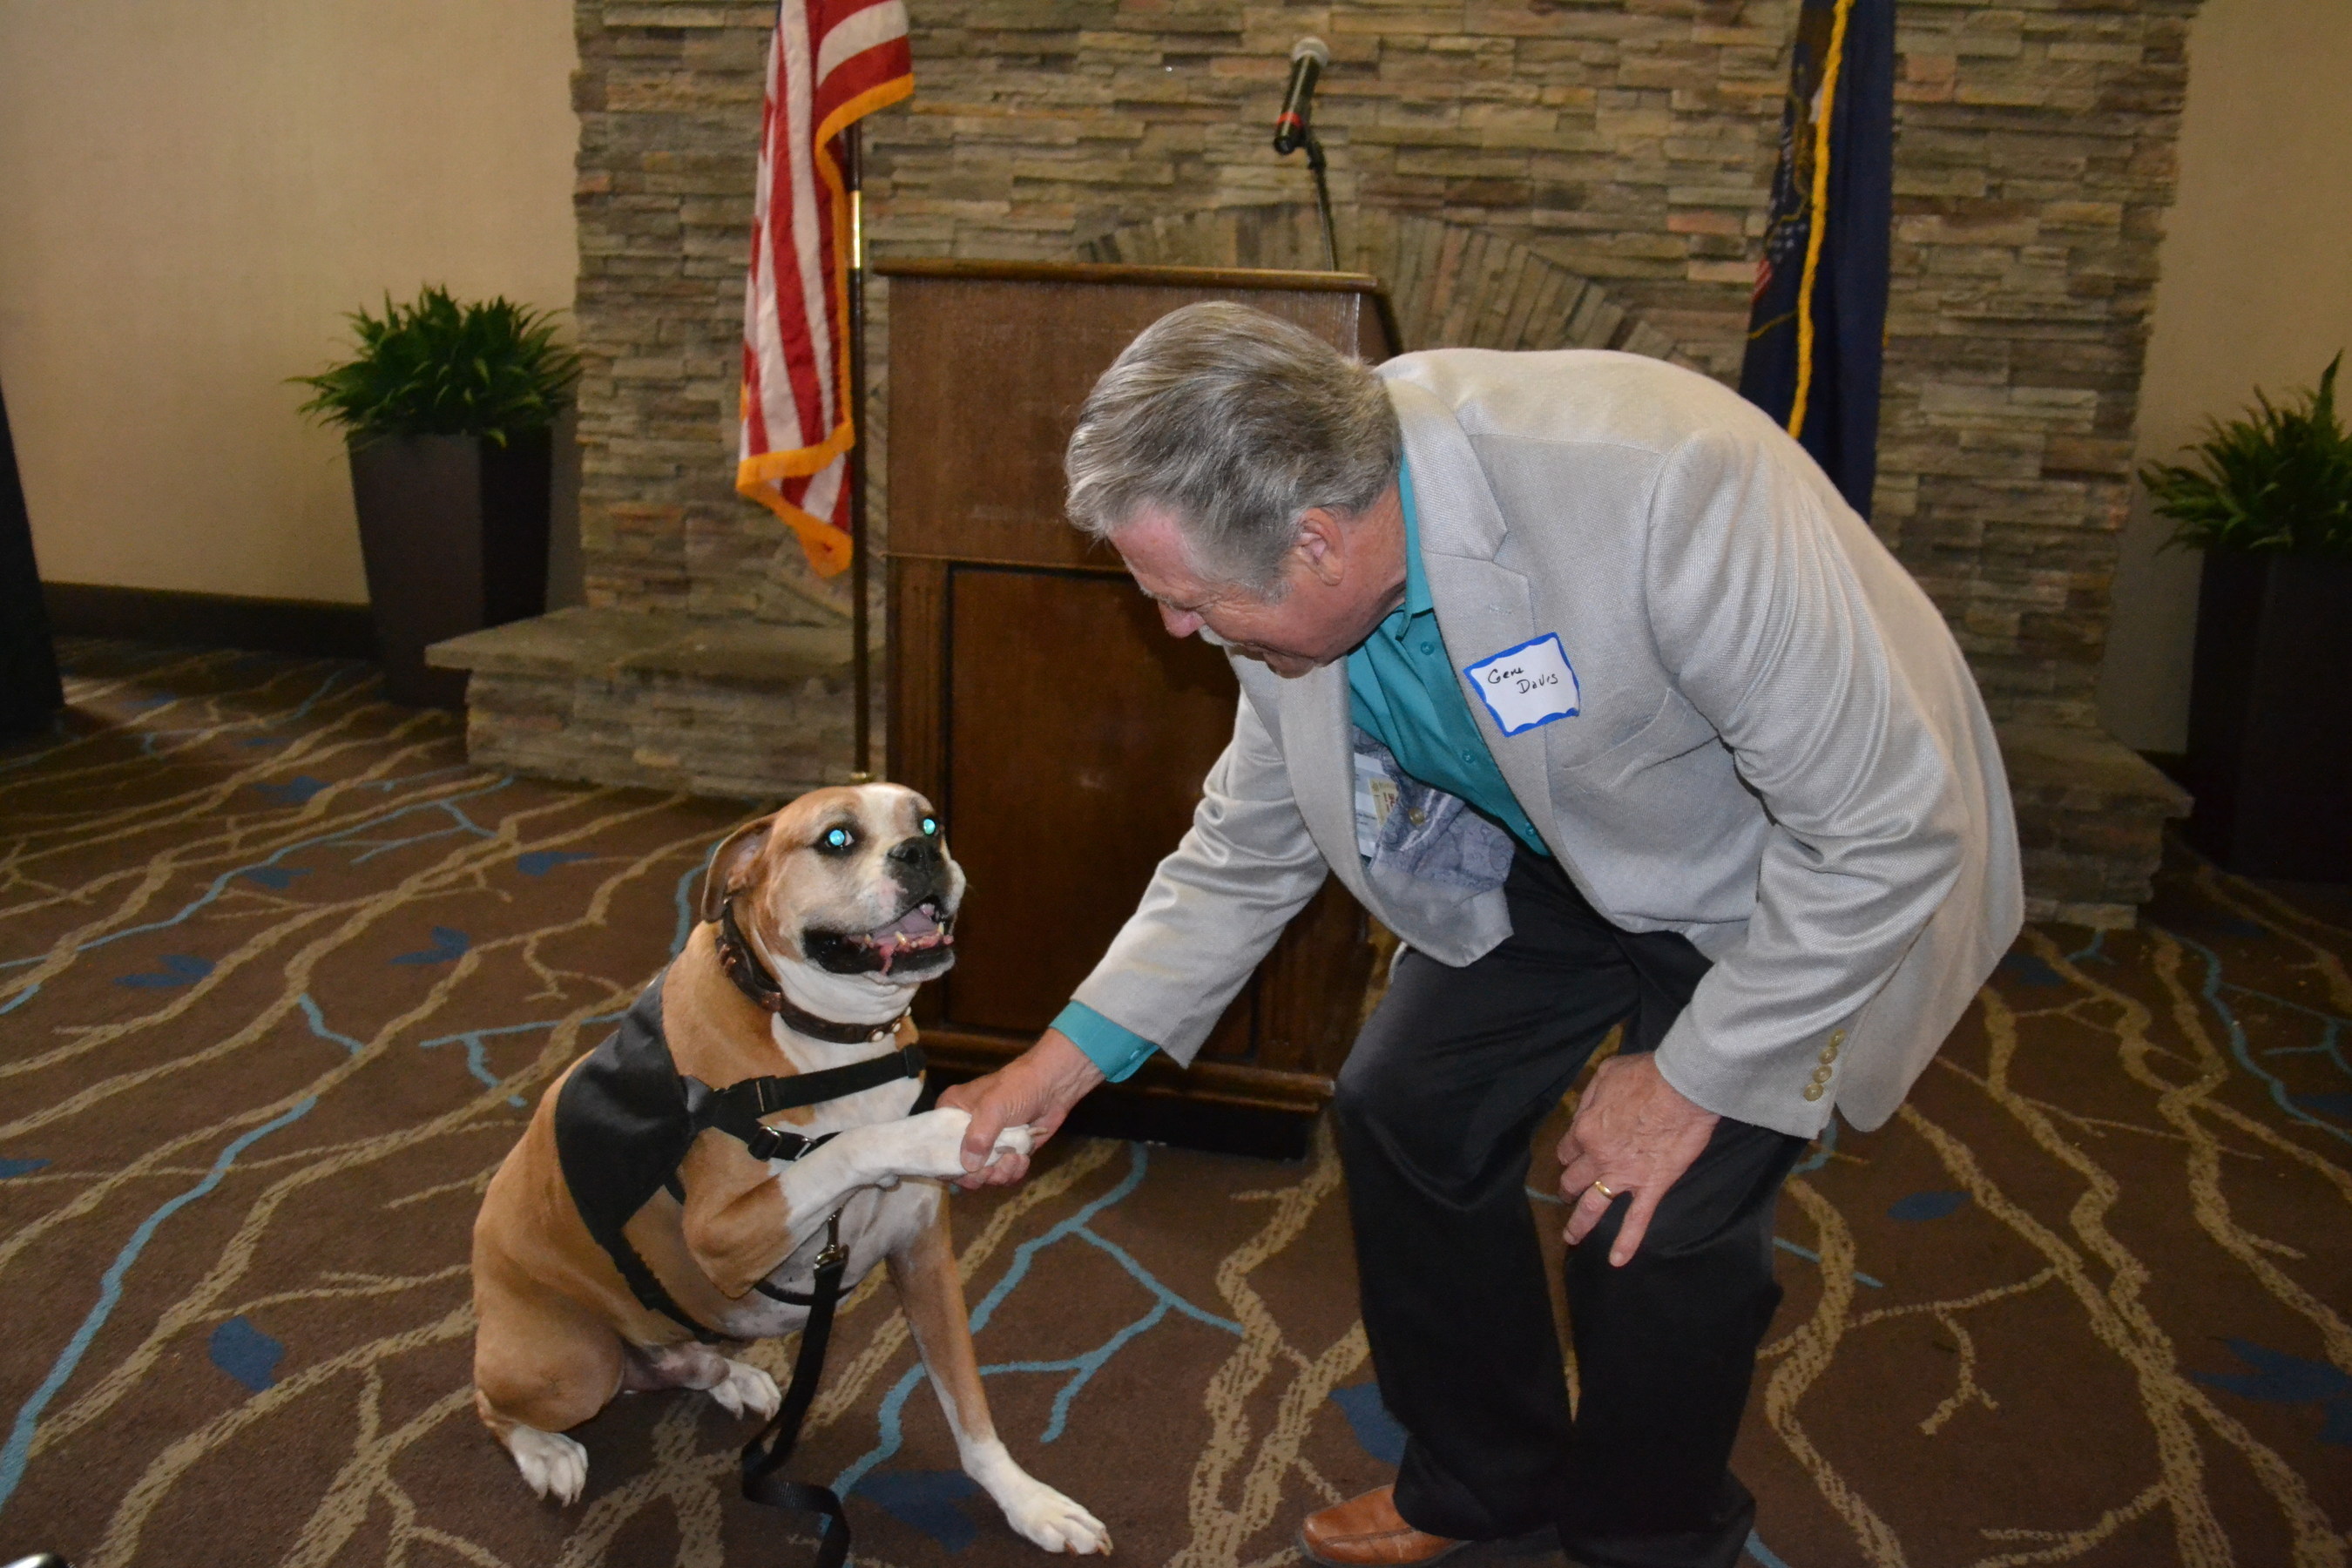 Tex, pictured here making a "pawshake agreement" with Utah Senate Minority Leader Gene Davis while on the campaign trail last month, will be inaugurated as Canine Mayor of Salt Lake County during a council meeting Tuesday evening, Nov. 25.